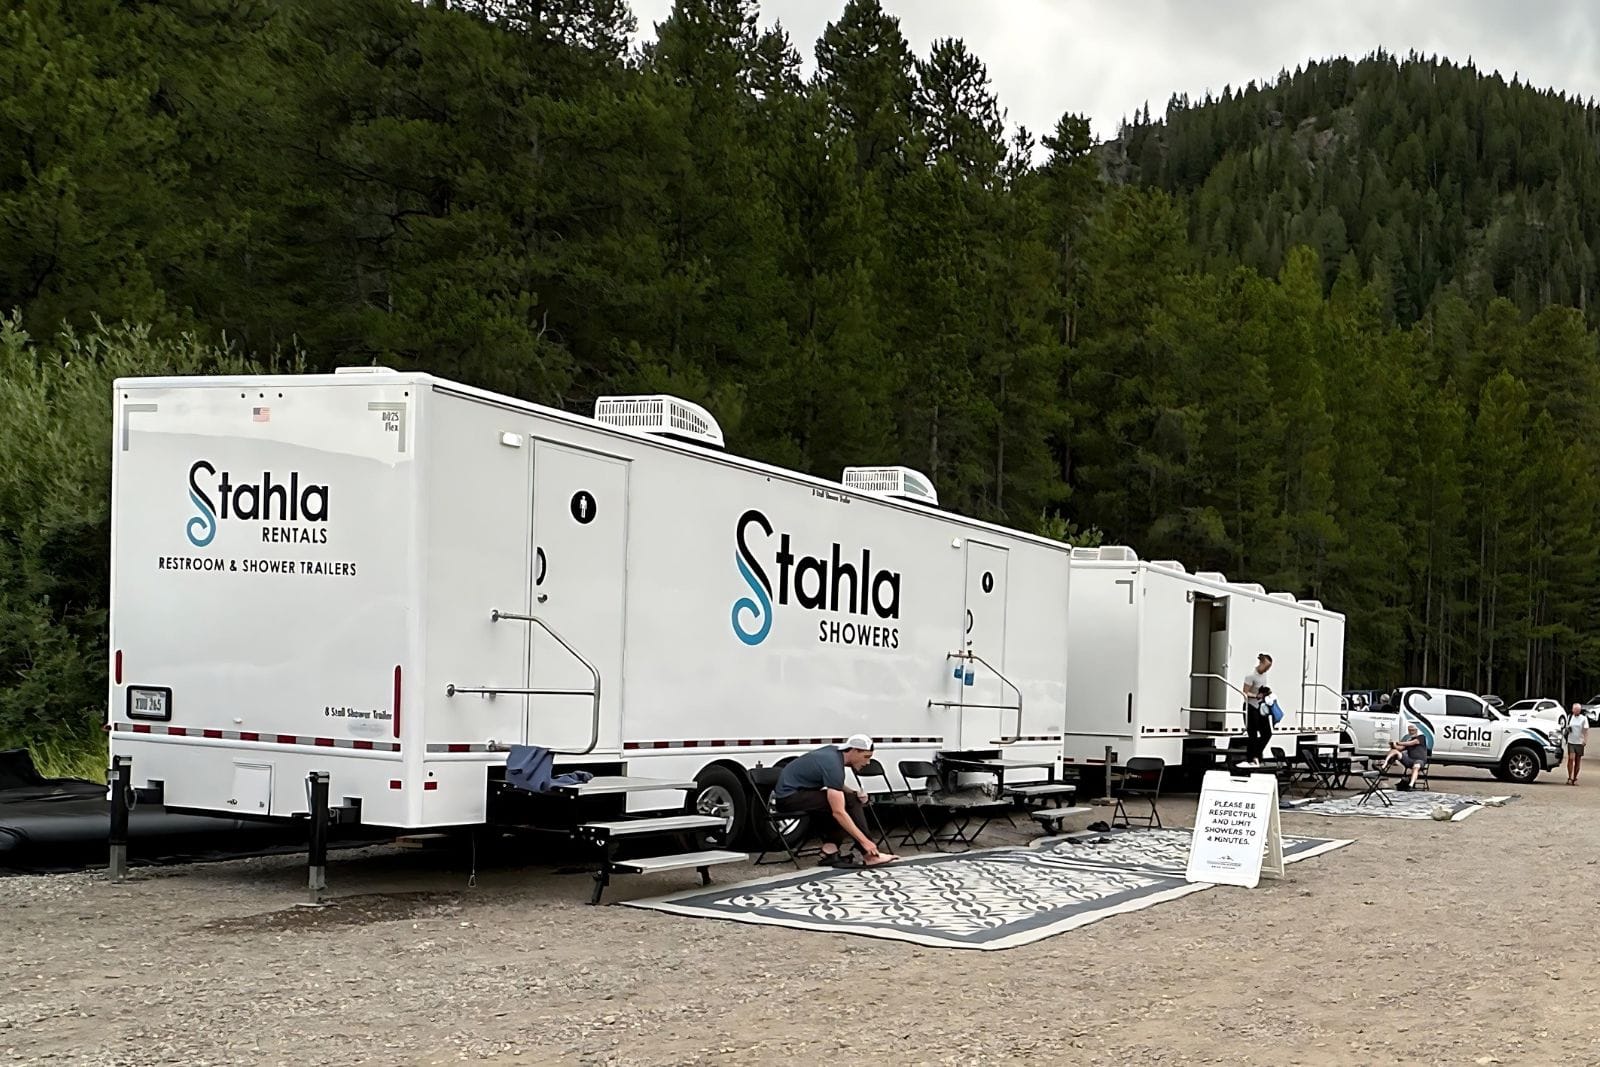 Mobile restroom and shower trailers in forest setting.